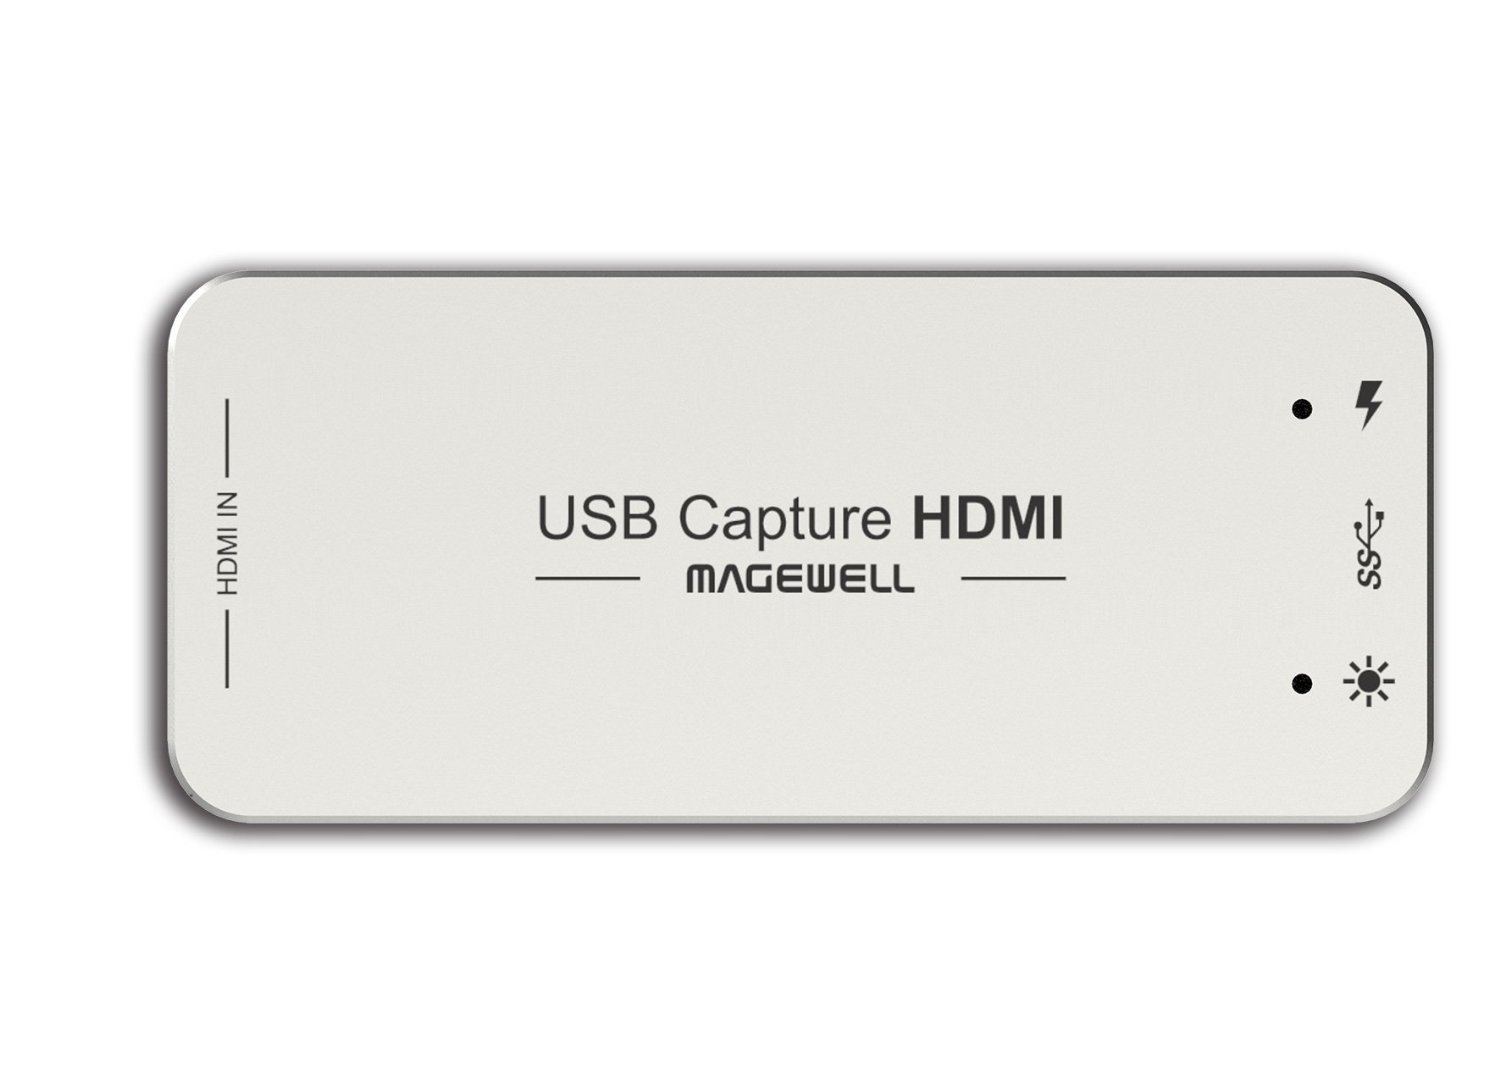 Magewell USB Capture HDMI | Eastern Broadcasting